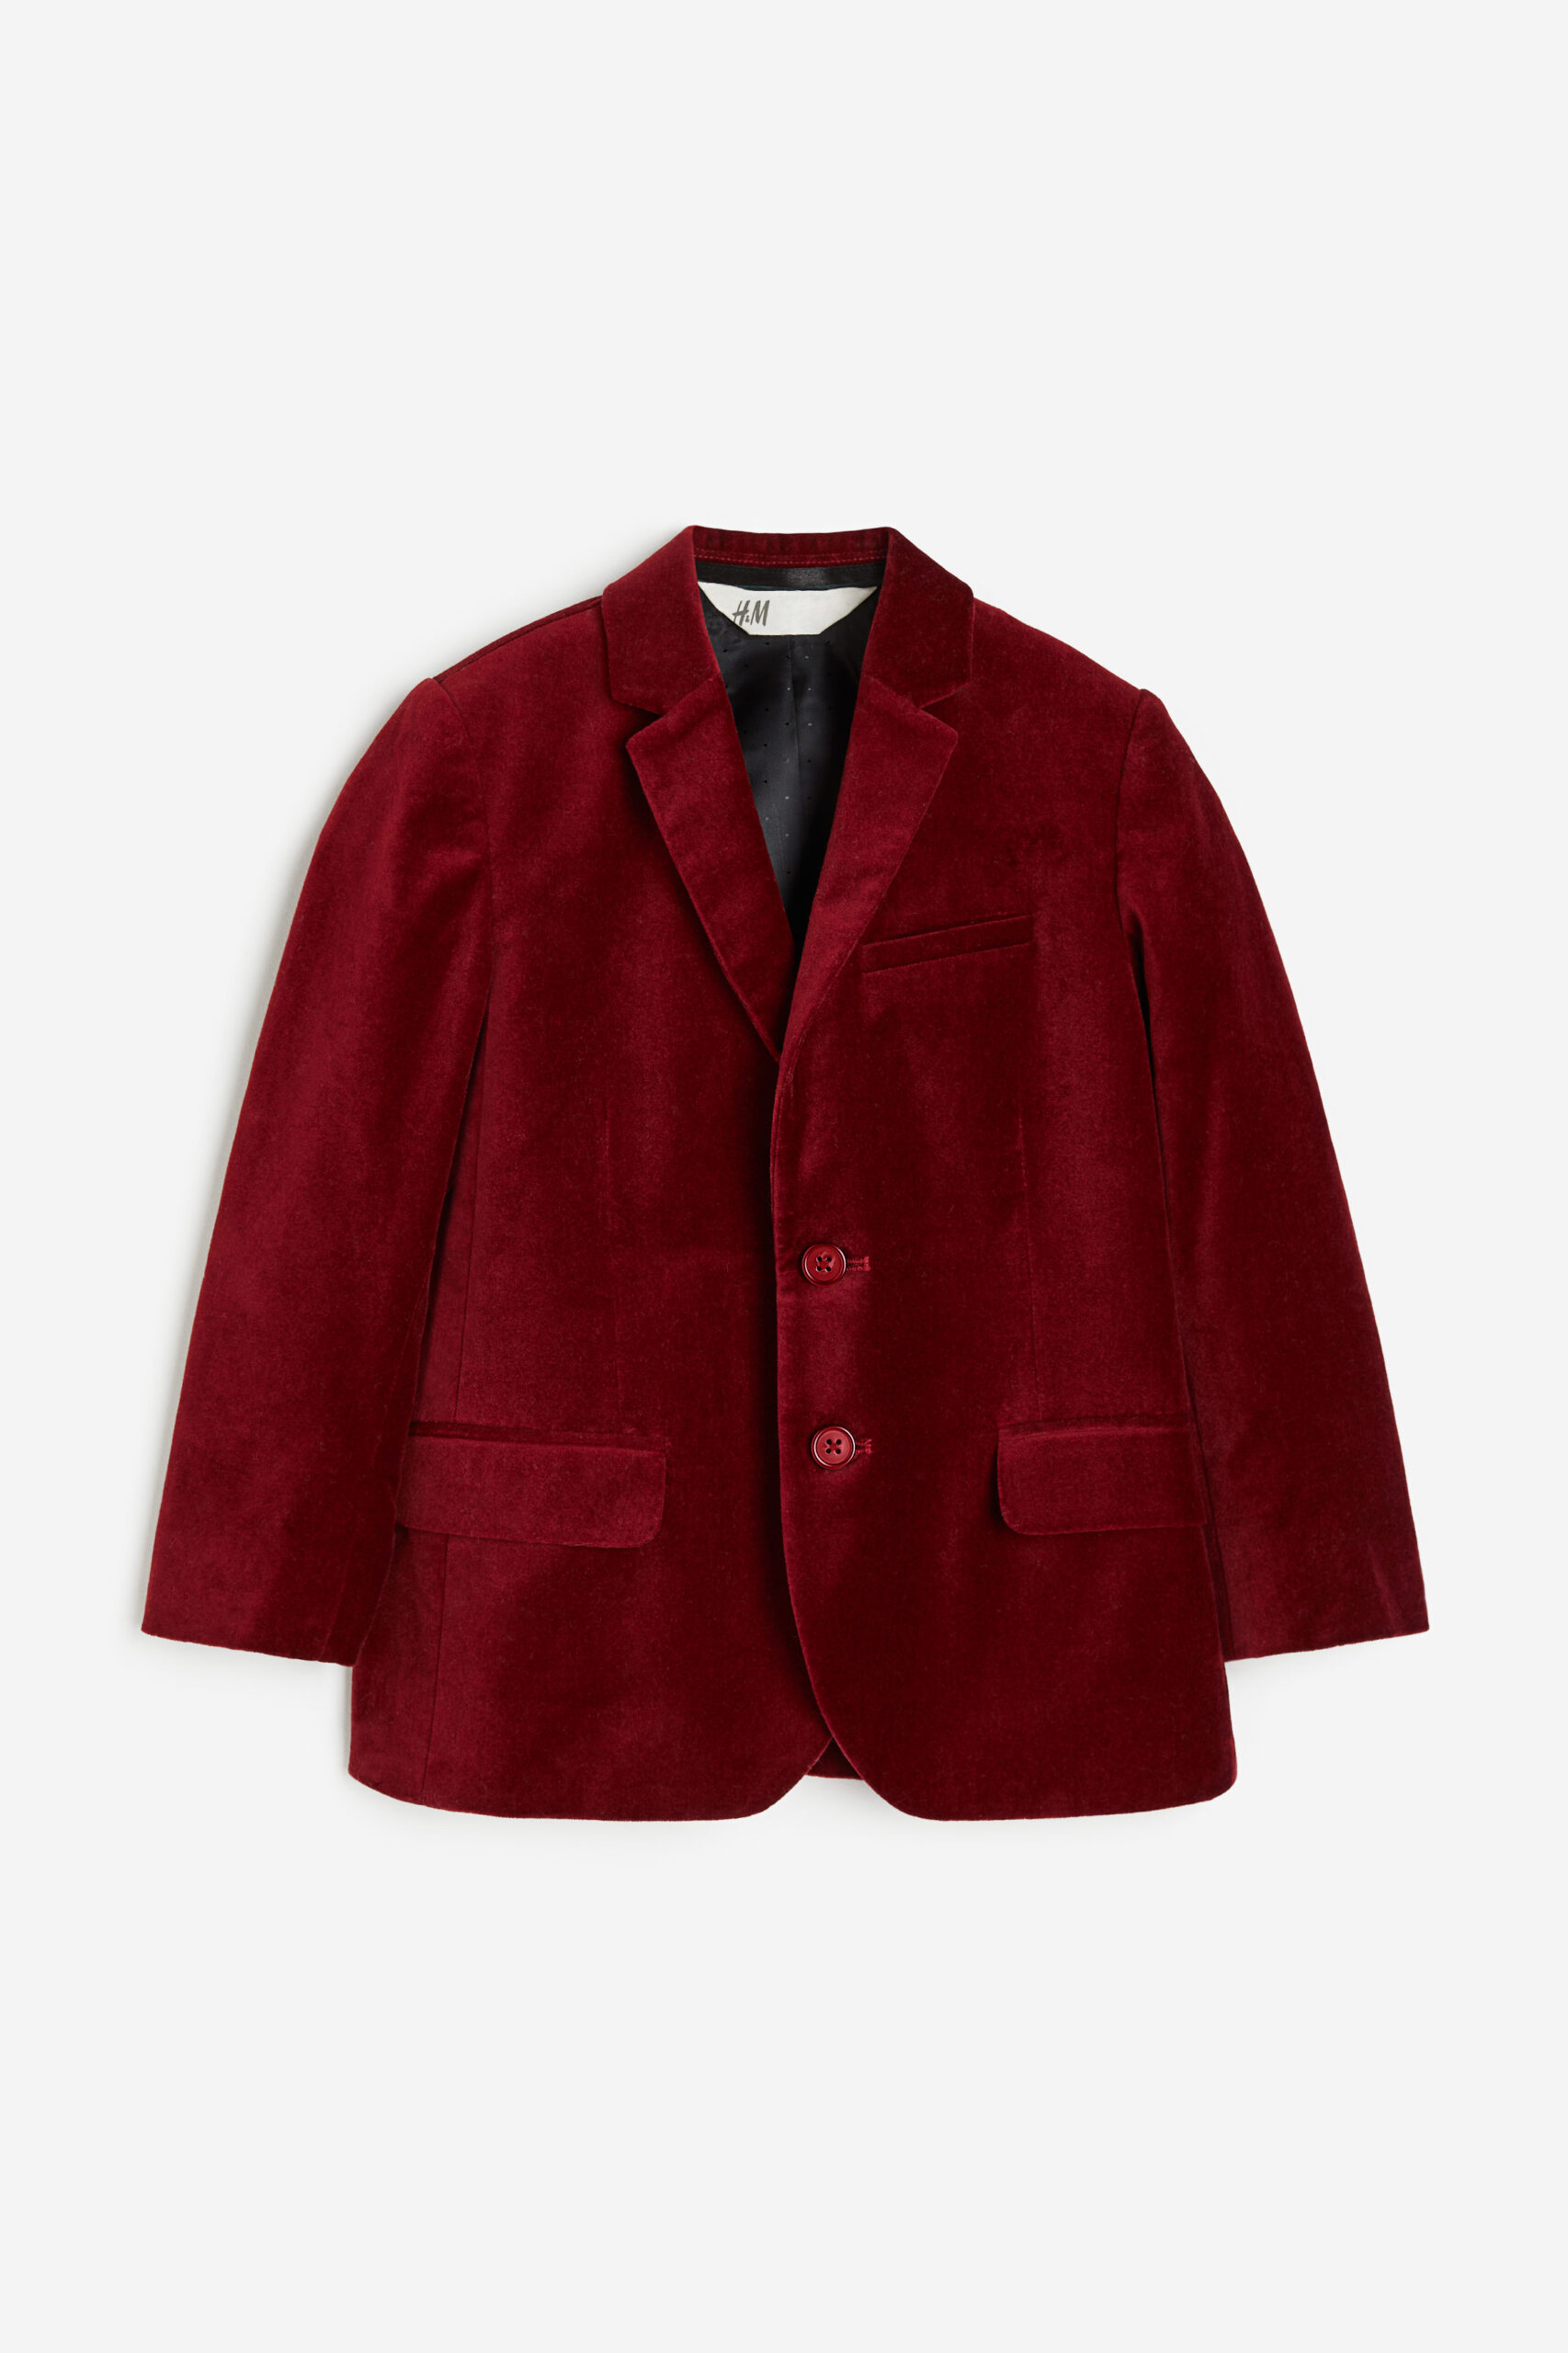 boys red suit jacket